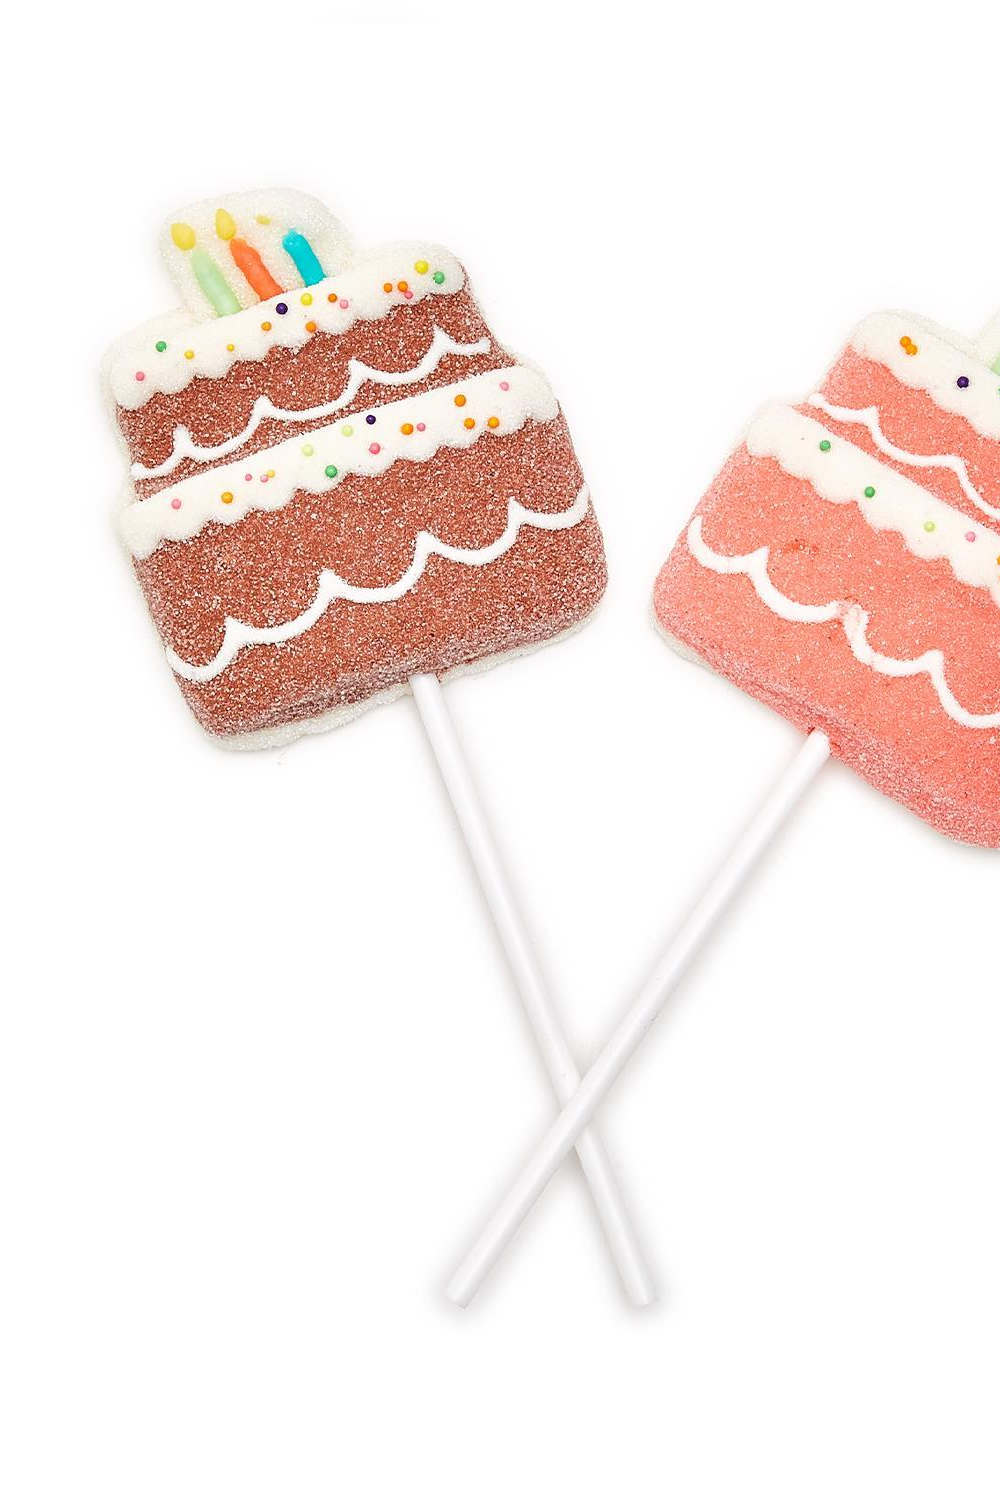 Clear Acrylic Popsicle Sticks for Cakesicles, Ice Cream, Glitter Pops, Cake  Pops - Sweets & Treats™